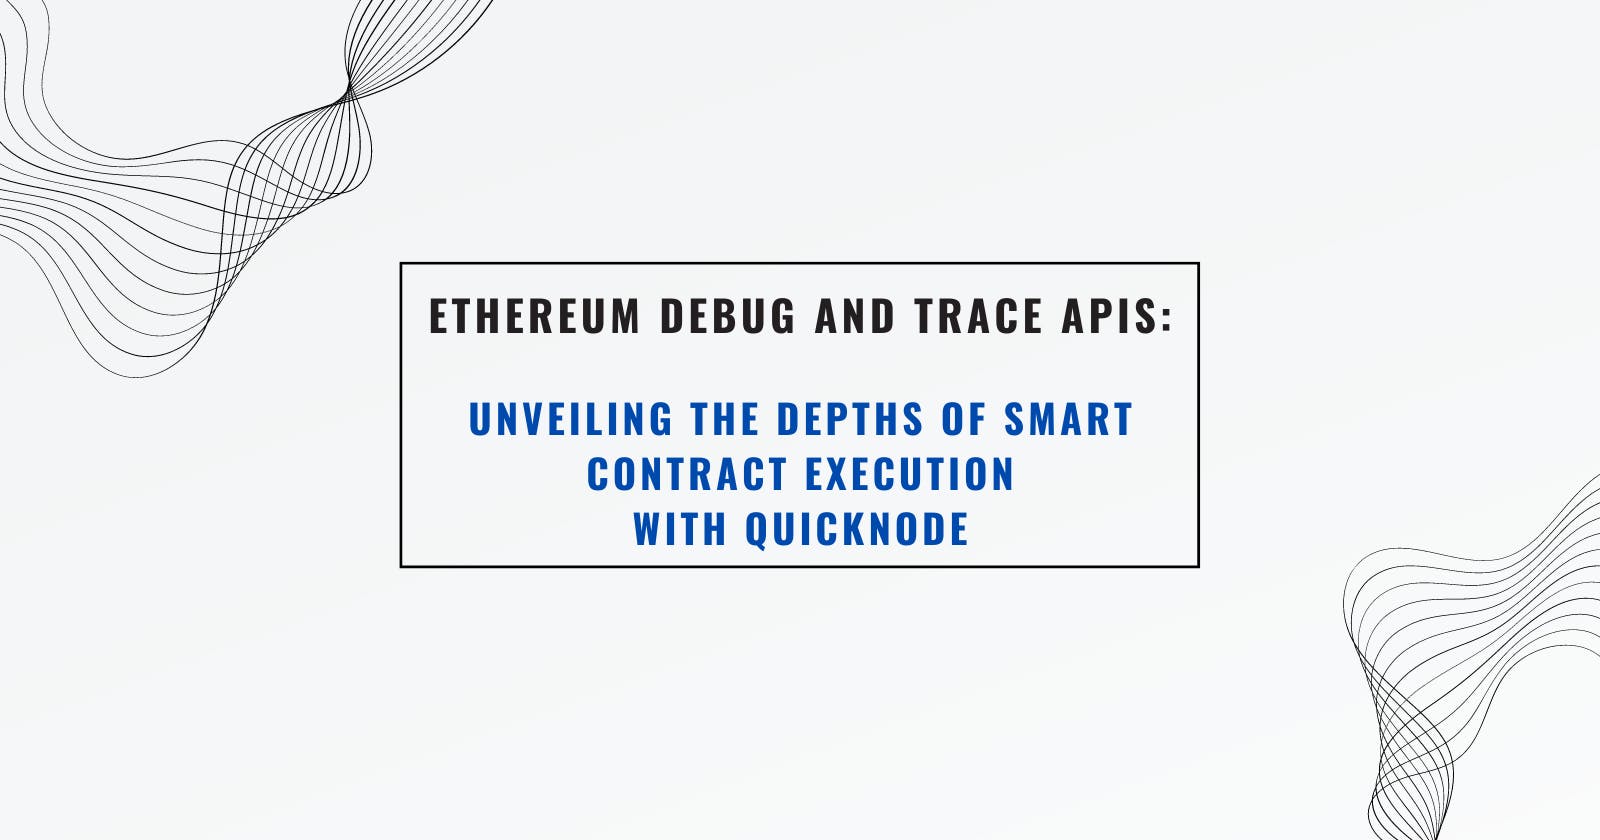 Ethereum Debug and Trace APIs: Unveiling the Depths of Smart Contract Execution with QuickNode